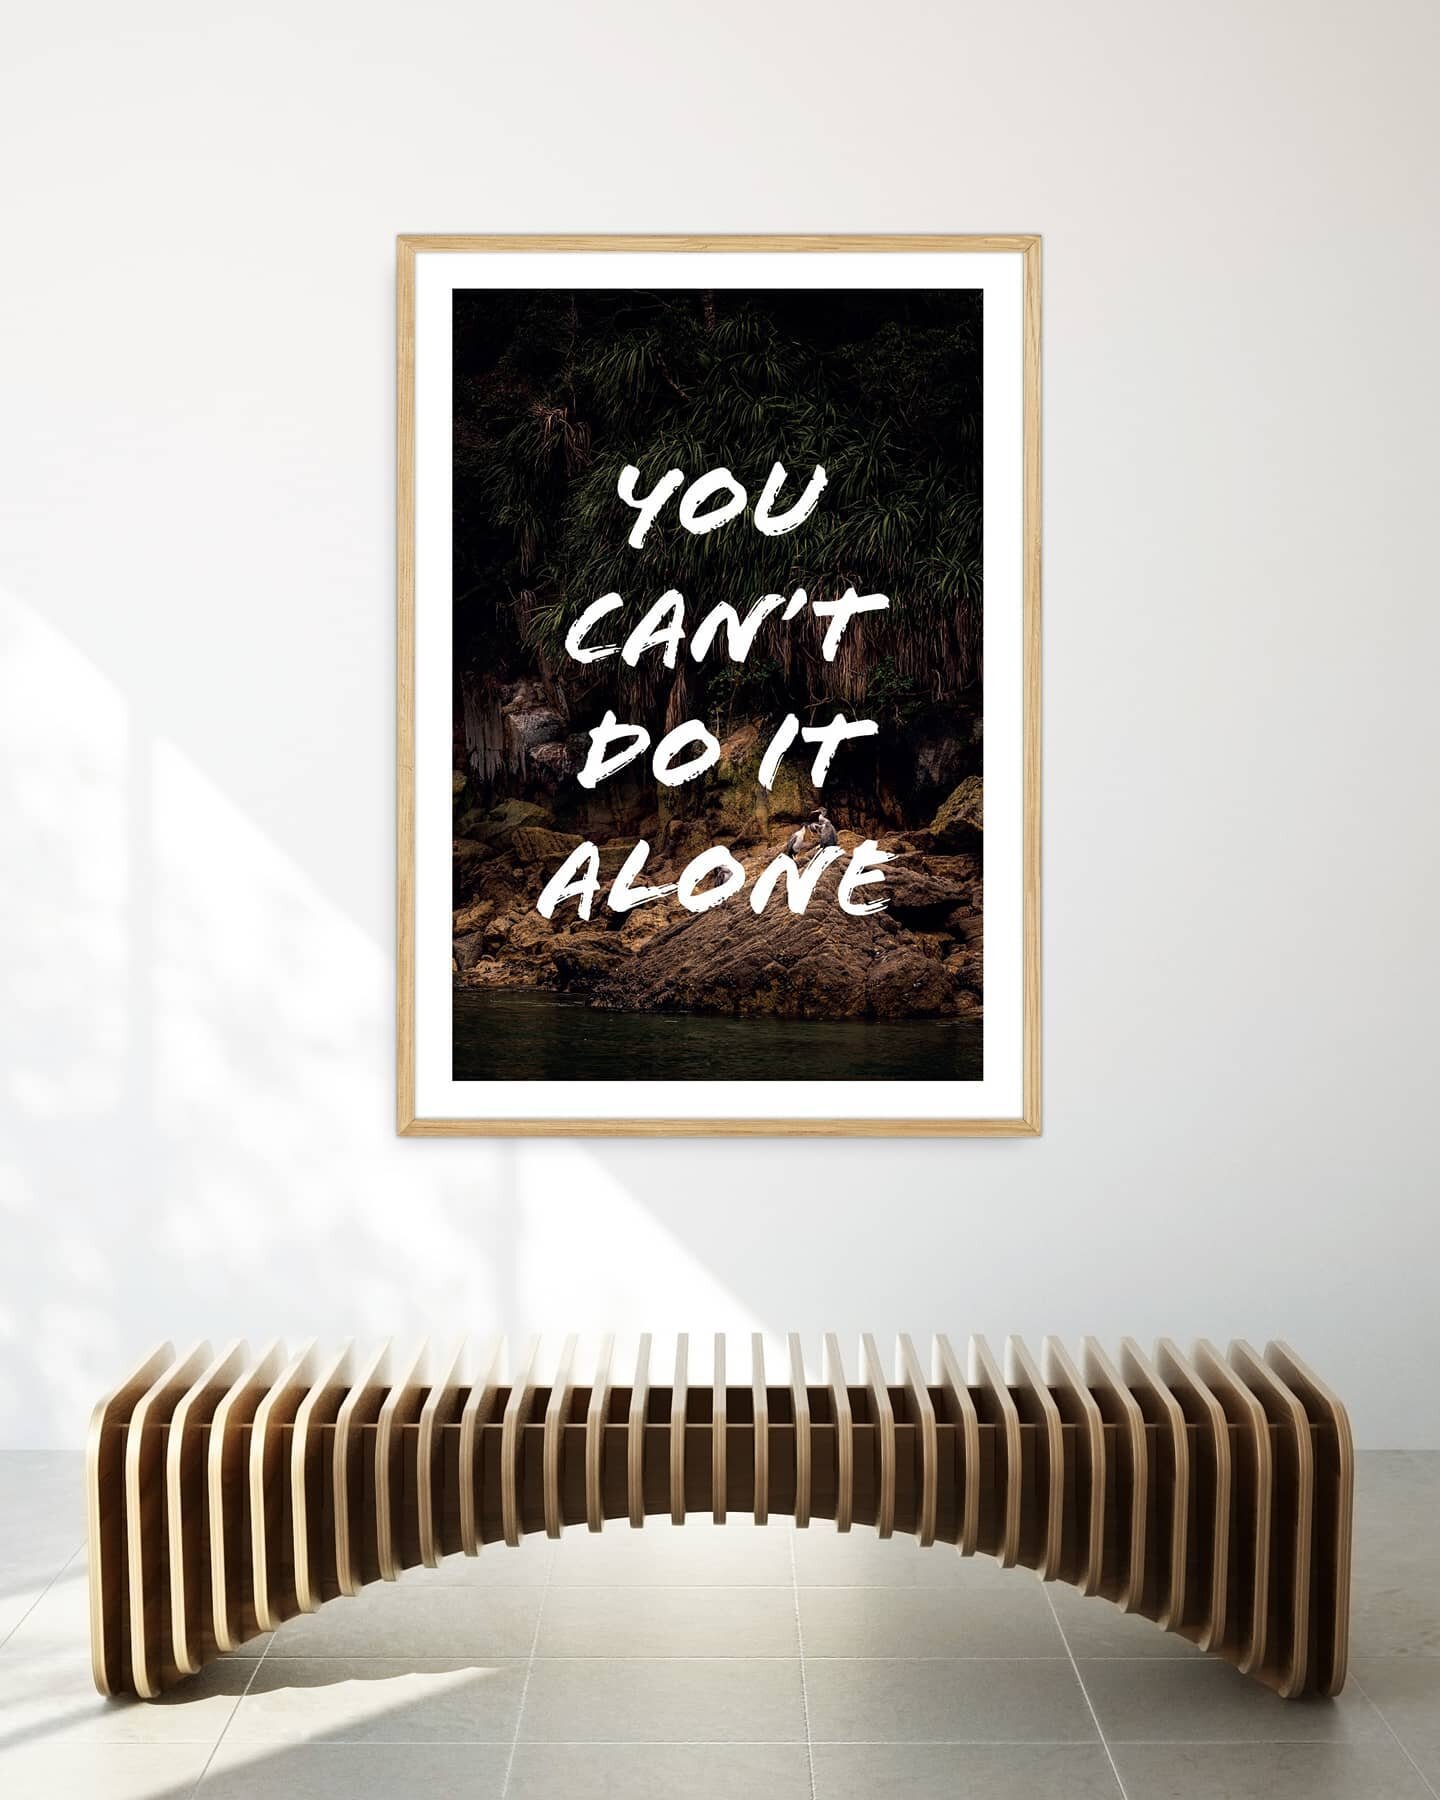 Find that one partner, team, band and do great stuff. You can't do it alone.

New posters @  www.kvestergaard.dk/shop. (Link in bio)
.
.
.
#denmark #travel #photooftheday #nature  #photography #adventure #travelphotography  #outdoor #travelgram  #exp